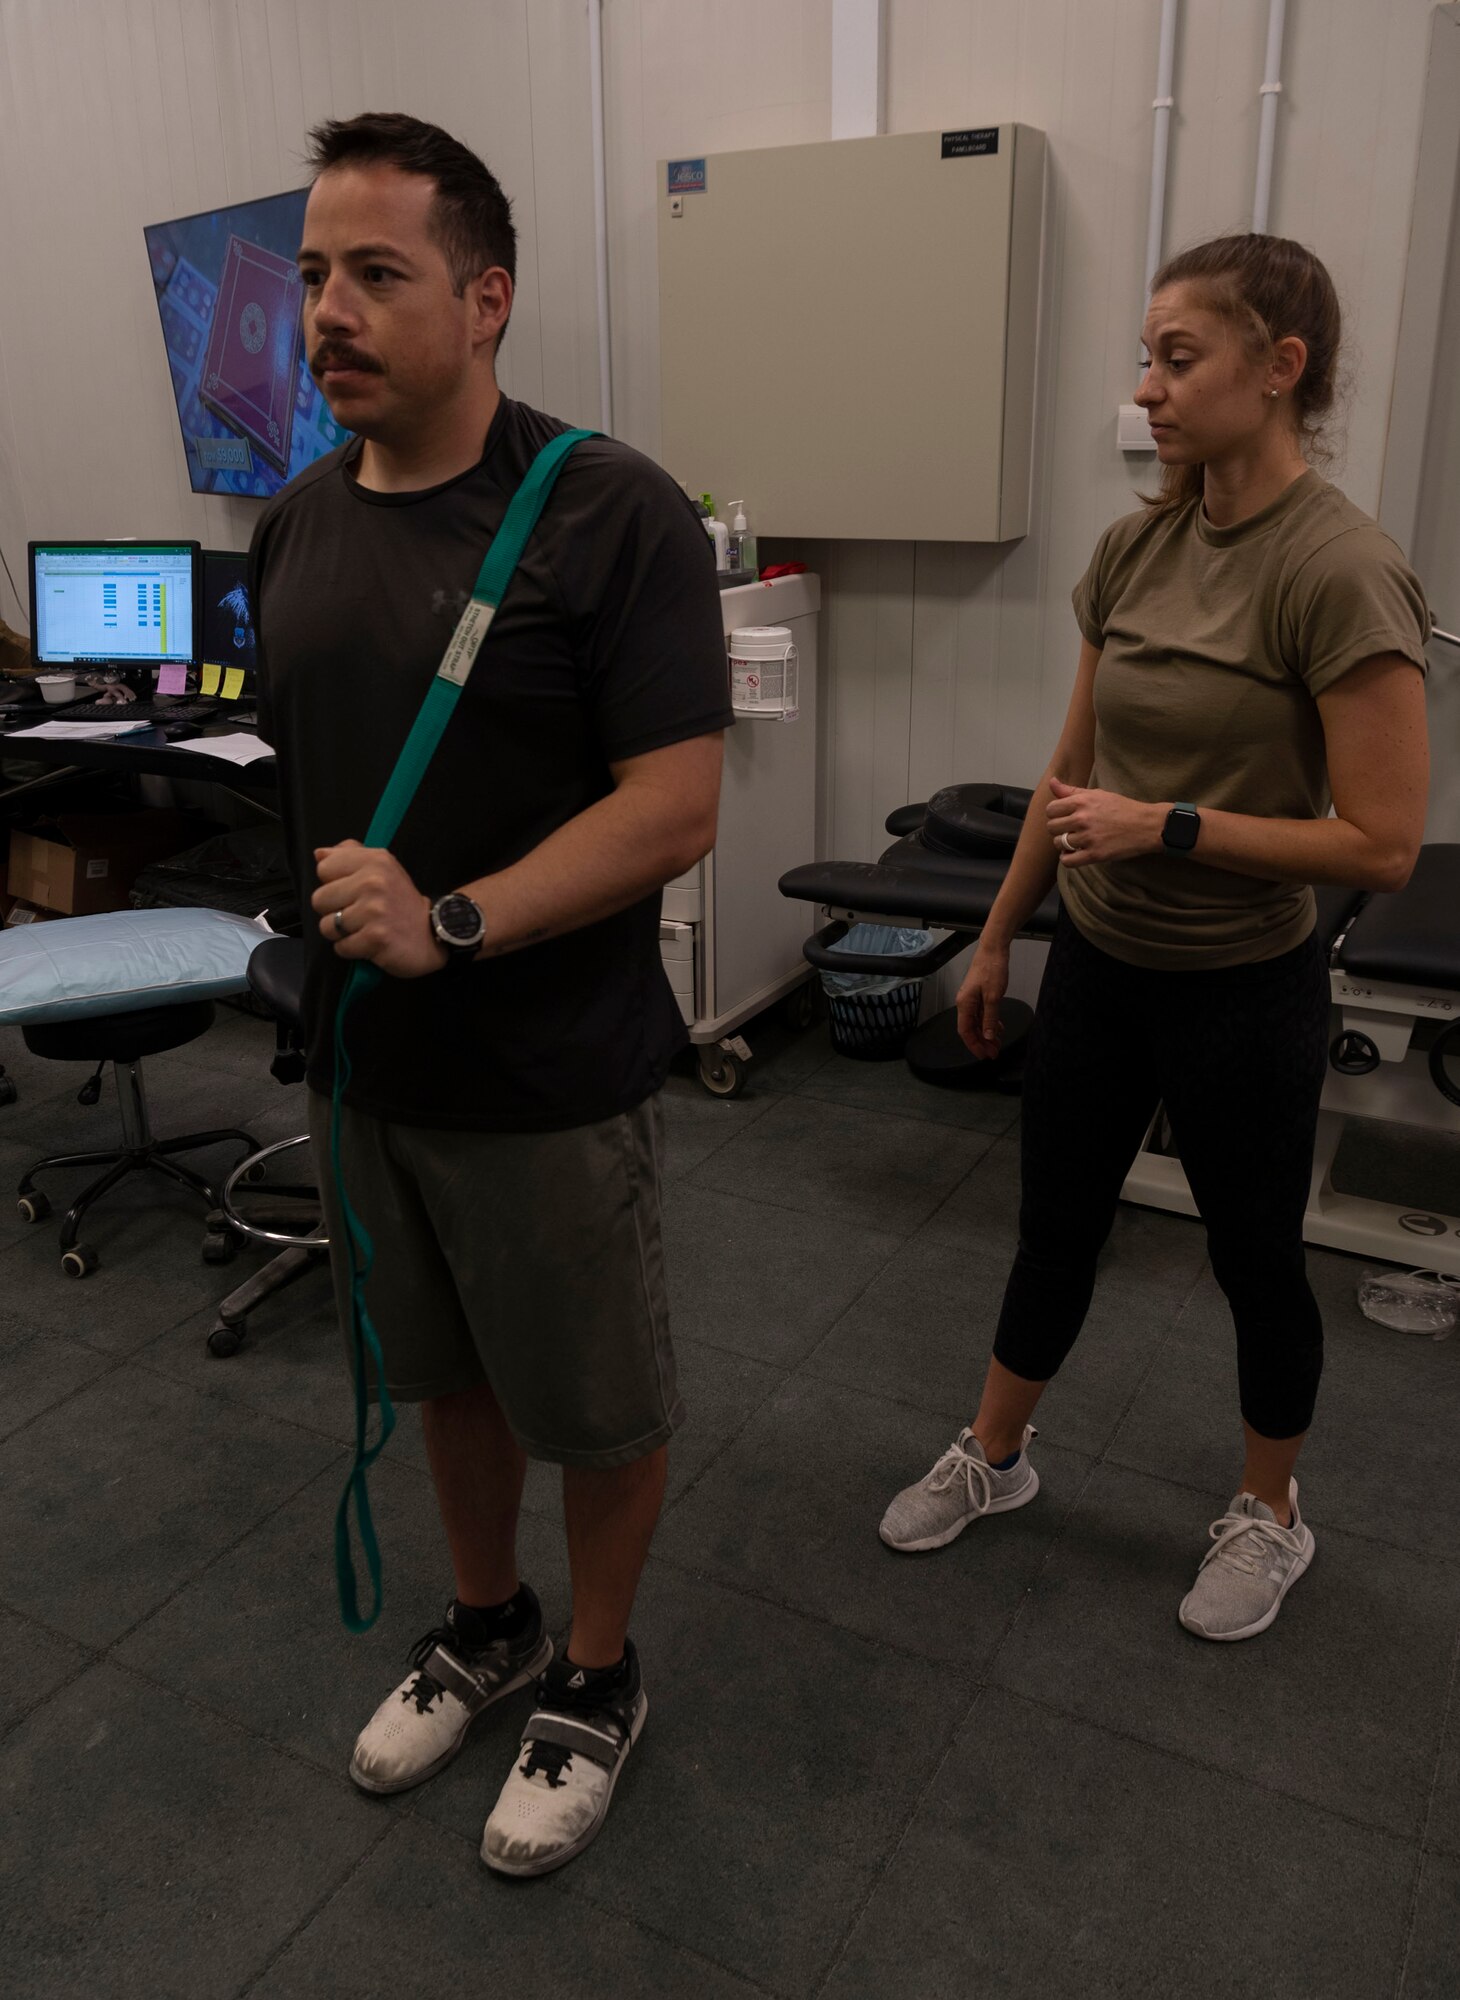 Major Kristen Stanford, 332d Expeditionary Medical Squadron, Human Performance Flight Commander, explains rehabilitation and exercise treatment for injured Airmen.